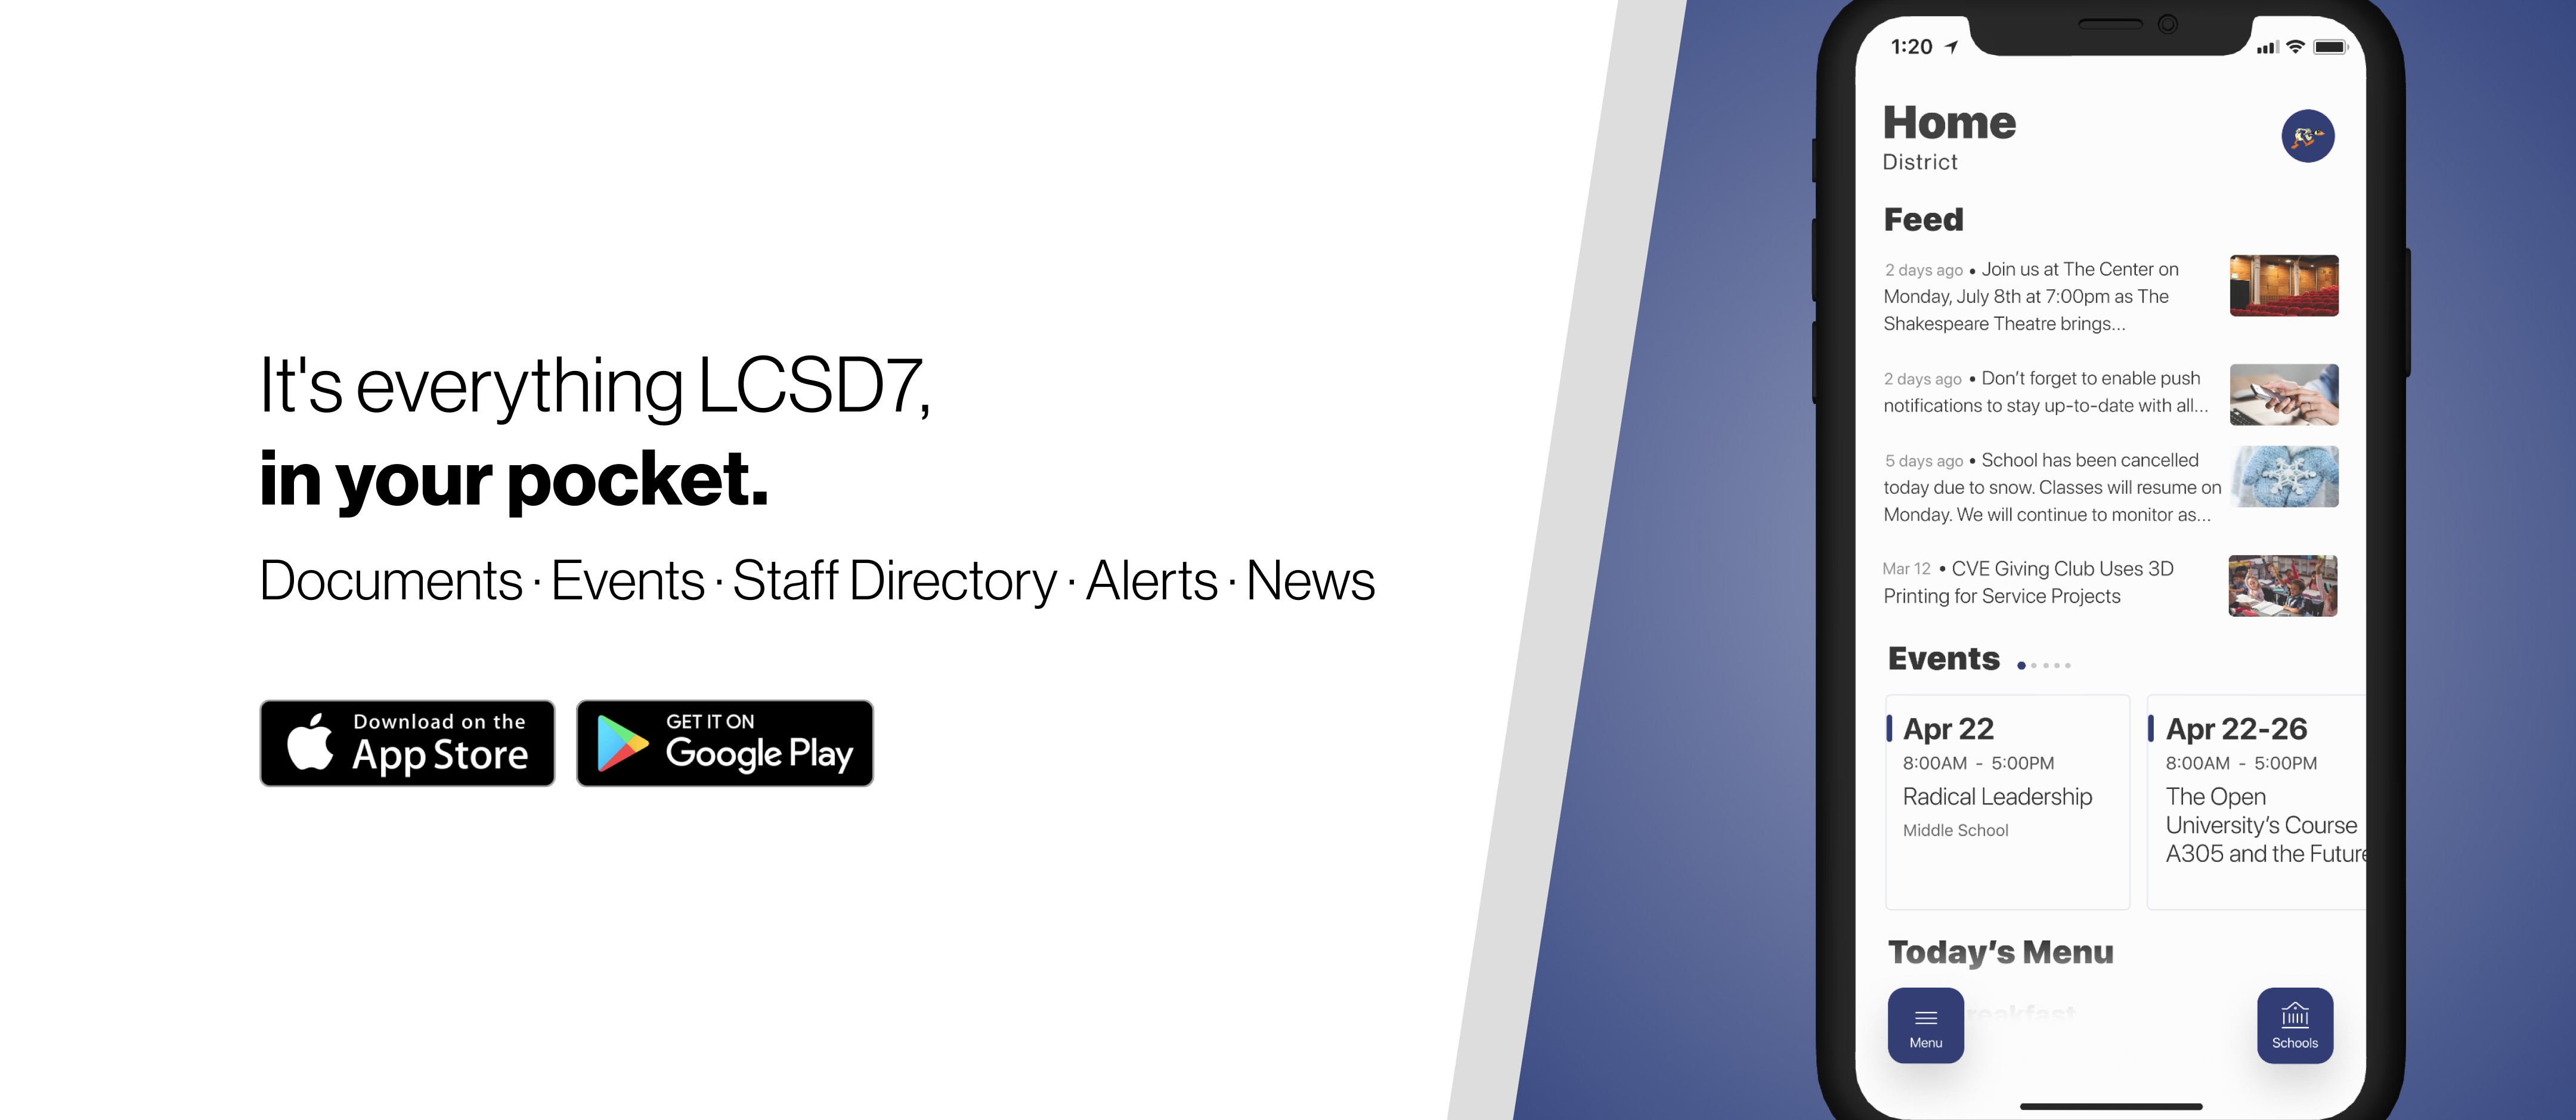 Its everything LCSD 7 in your pocket